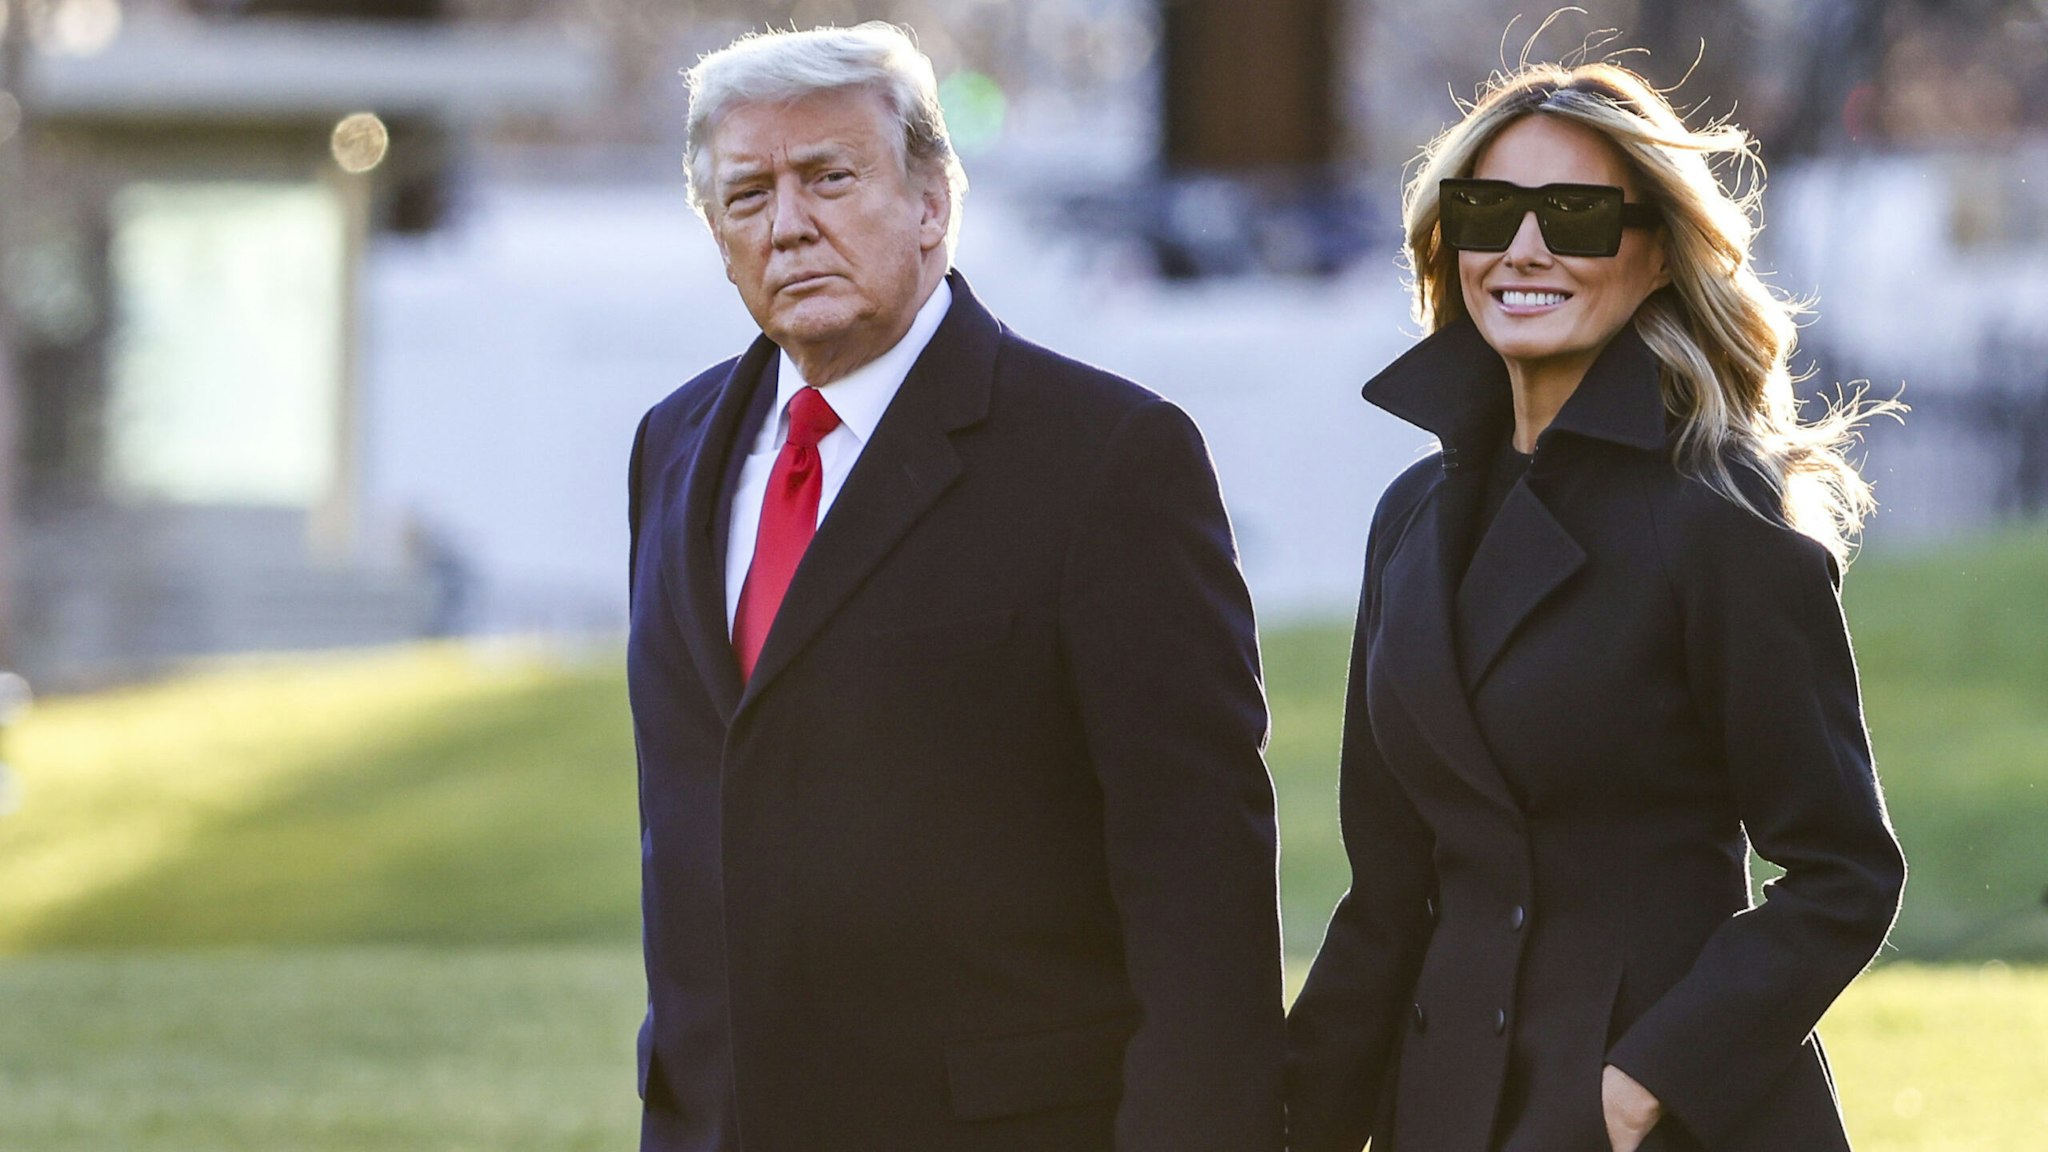 WASHINGTON, DC - DECEMBER 23: President Donald Trump and first lady Melania Trump walk on the south lawn of the White House on December 23, 2020 in Washington, DC. The Trumps are headed to Mar-a-Lago for the holidays with a government shutdown possible on Monday December 28.